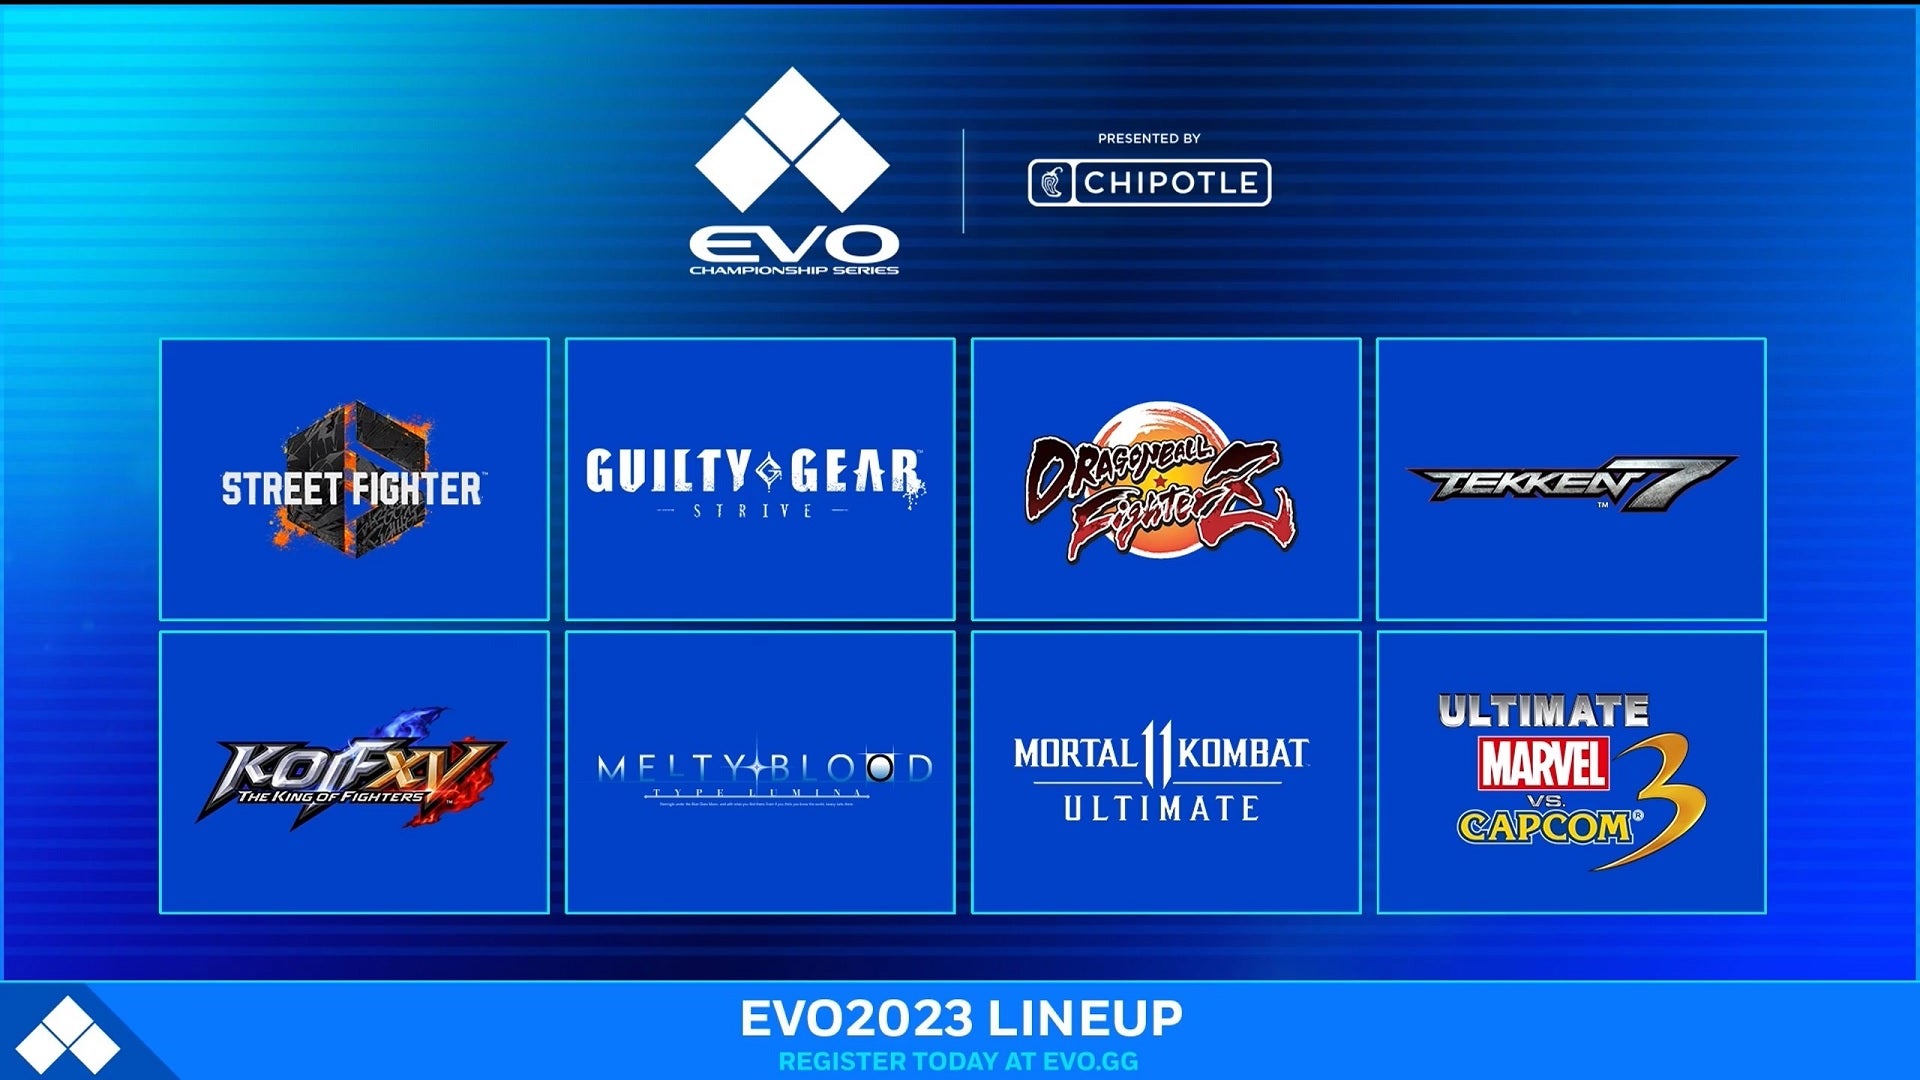 Official graphic showing Evo 2023 line-up